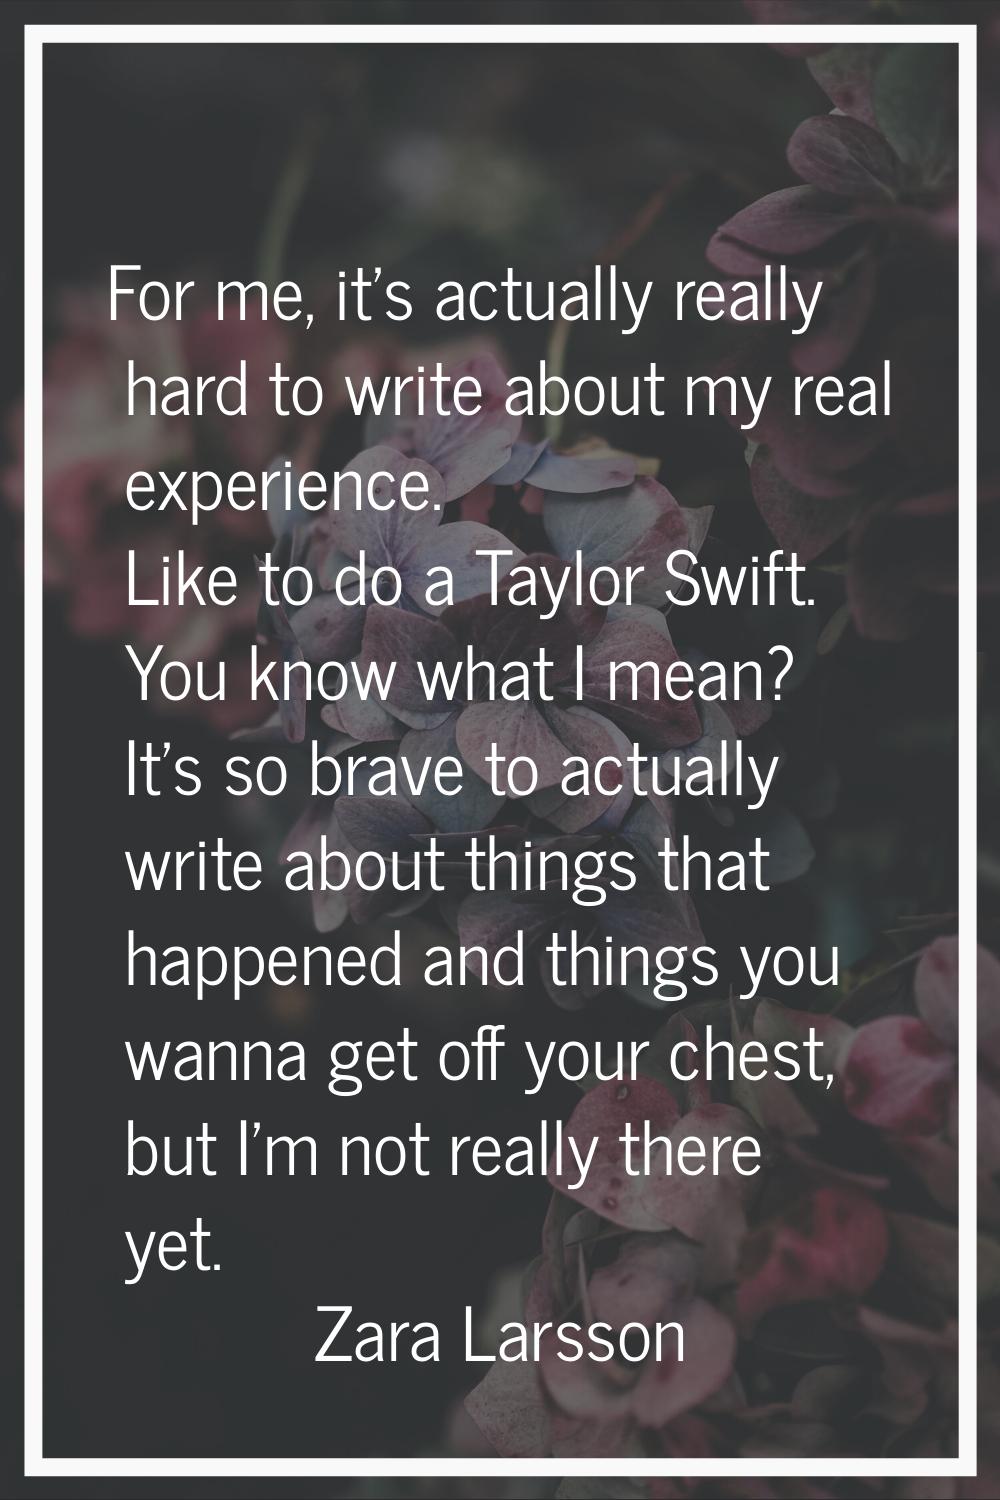 For me, it's actually really hard to write about my real experience. Like to do a Taylor Swift. You